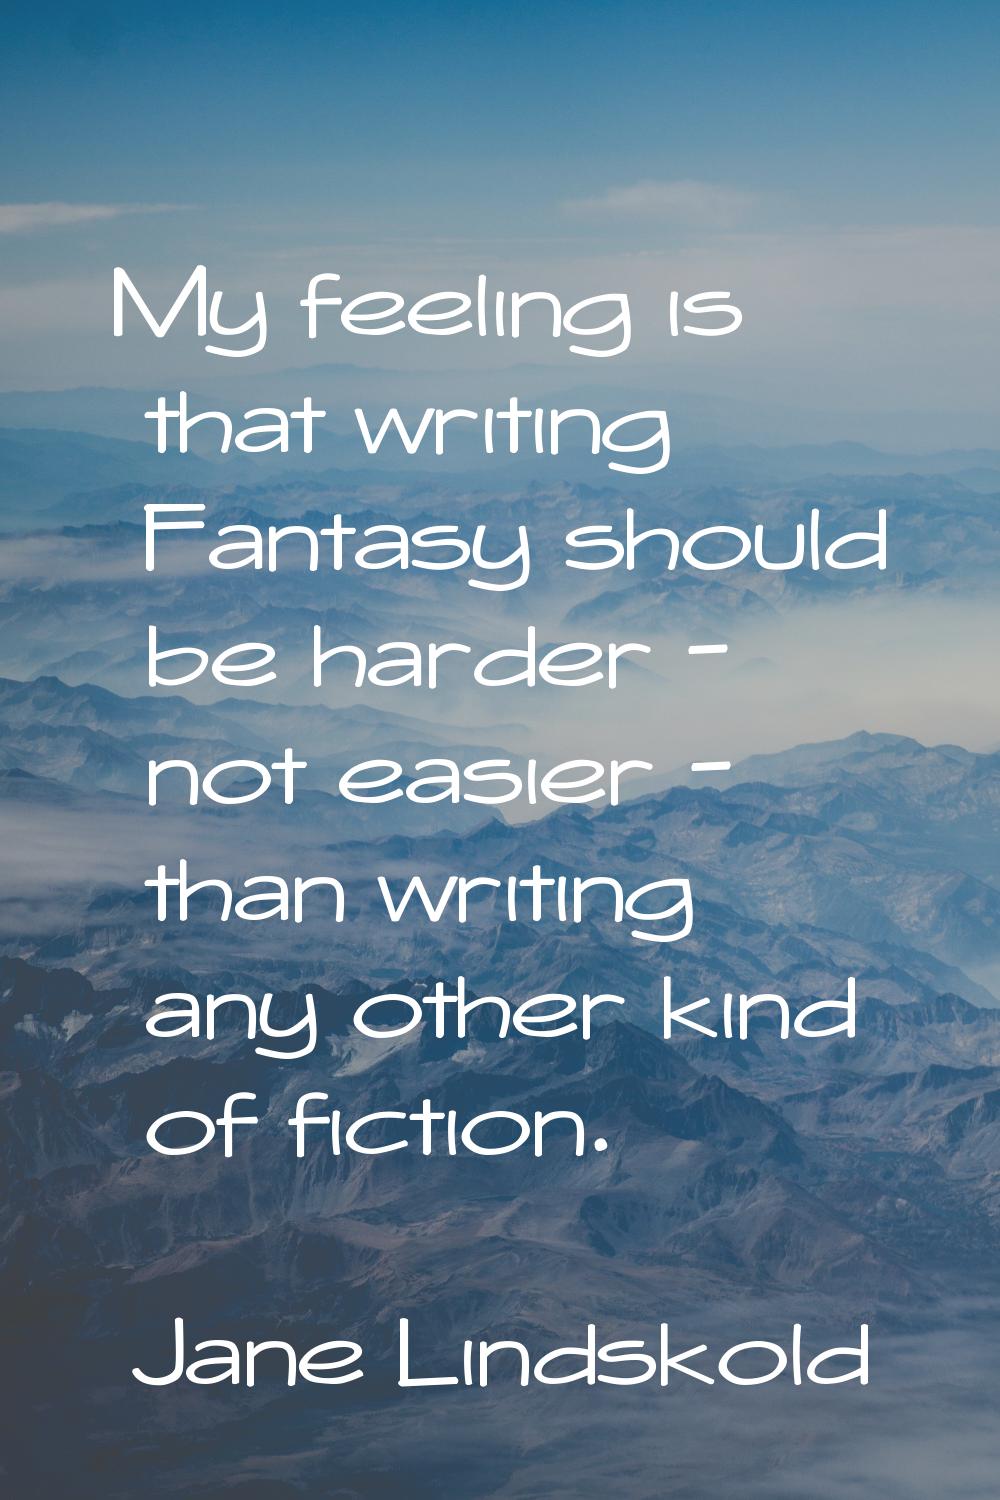 My feeling is that writing Fantasy should be harder - not easier - than writing any other kind of f